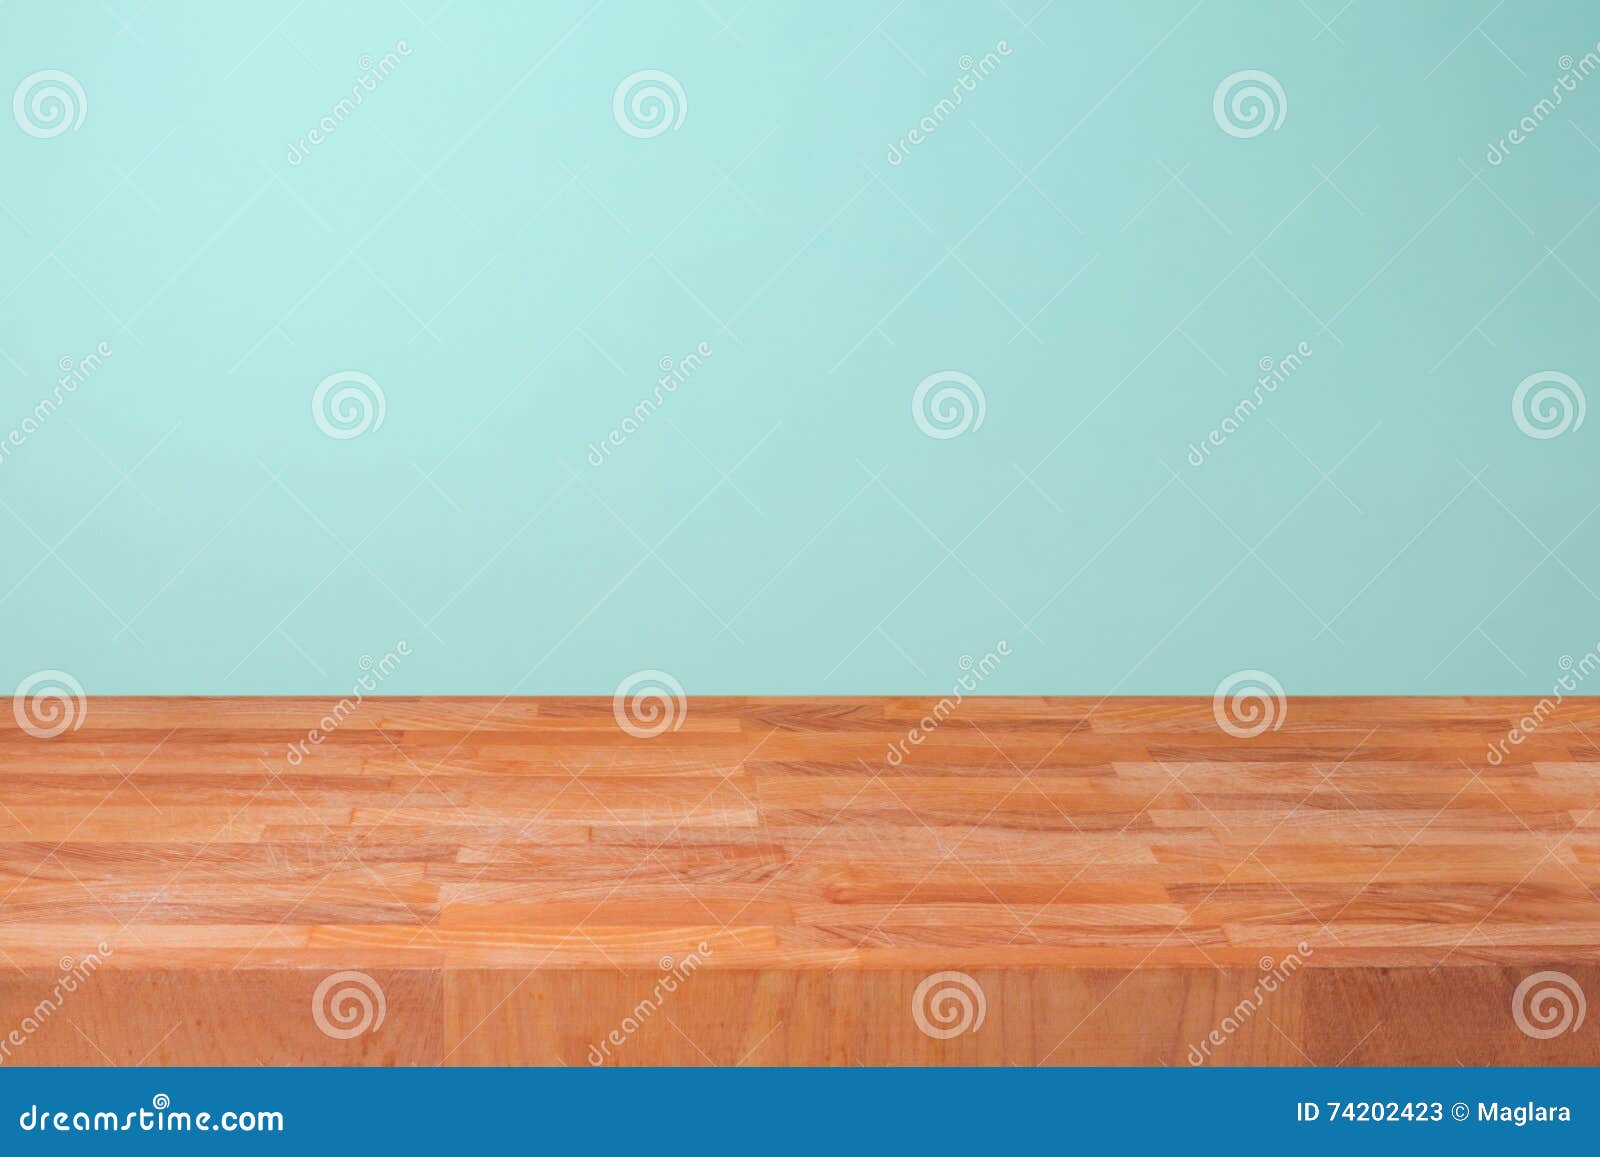 empty wooden kitchen counter over mint wall background for product montage